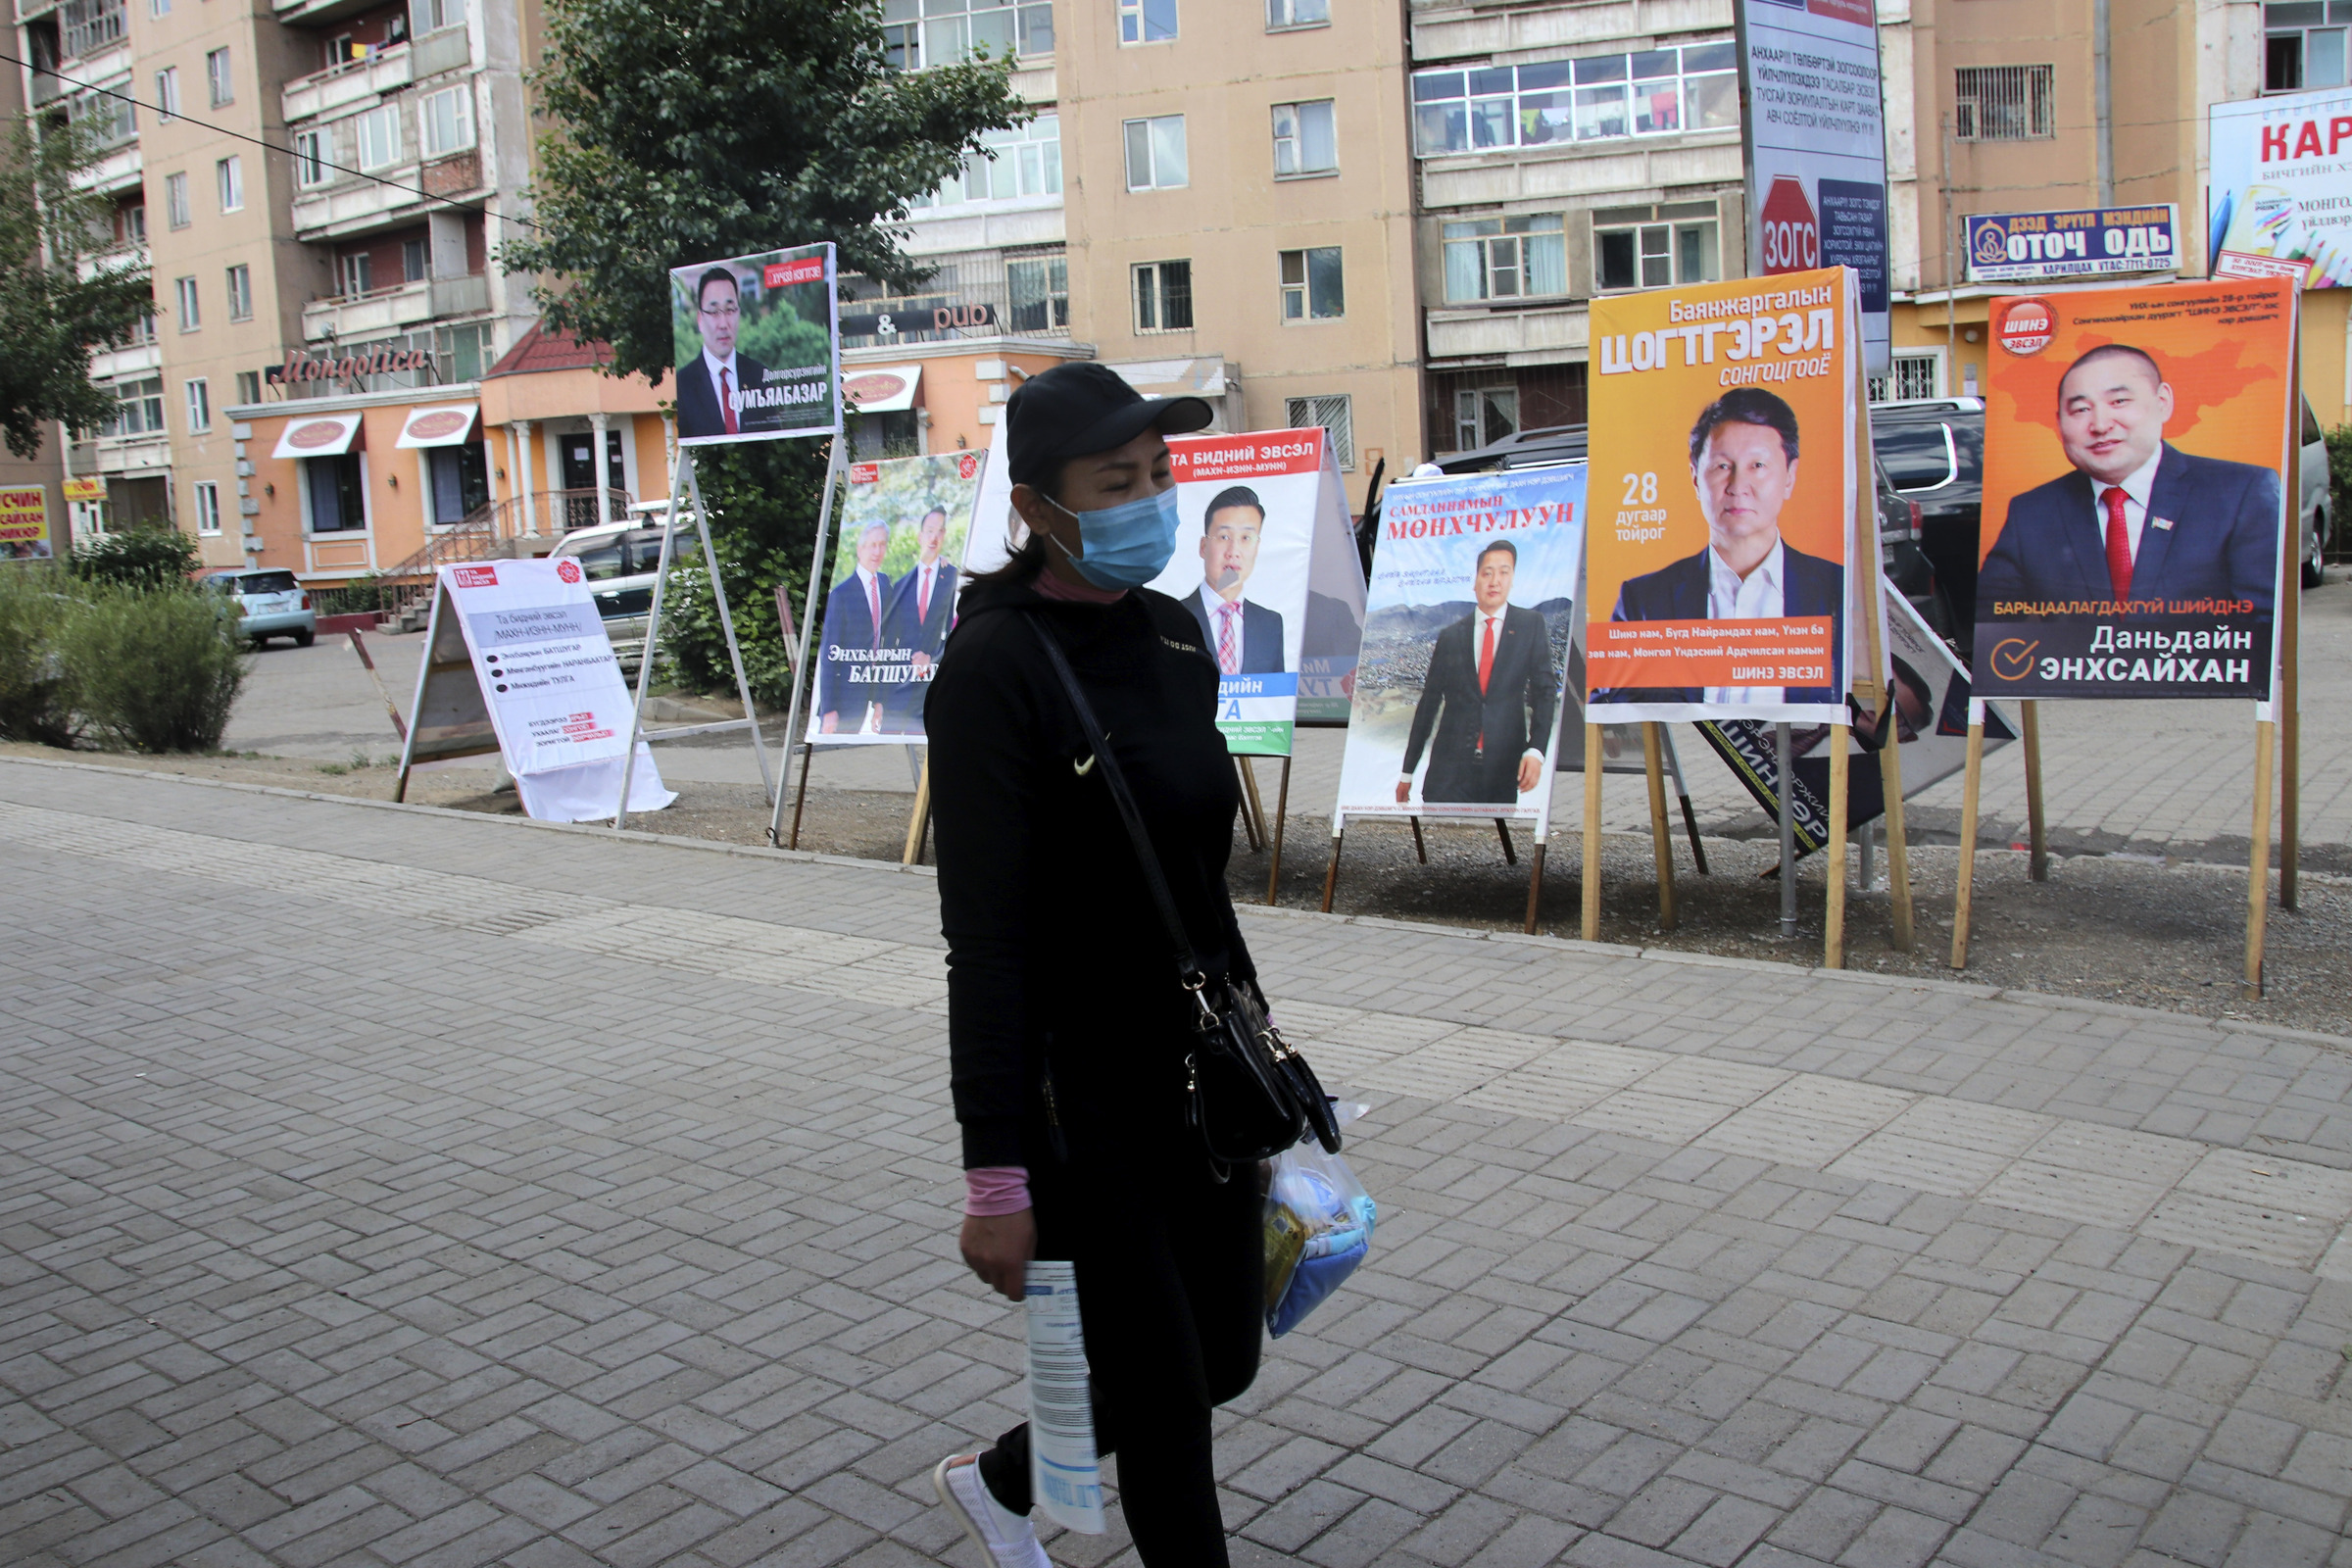 A resident carries groceries past posters and stands of various political party and independent candidates in the Songinokhairkhan district on the outskirts of Ulaanbaatar, Mongolia, Monday, June 22, 2020. Mongolia holds parliamentary elections on Wednesday, continuing a nearly 30-year democratic system in a vast but lightly populated country sandwiched between authoritarian regimes in Russia and China and beset by economic problems. (AP Photo/Ganbat Namjilsangarav)